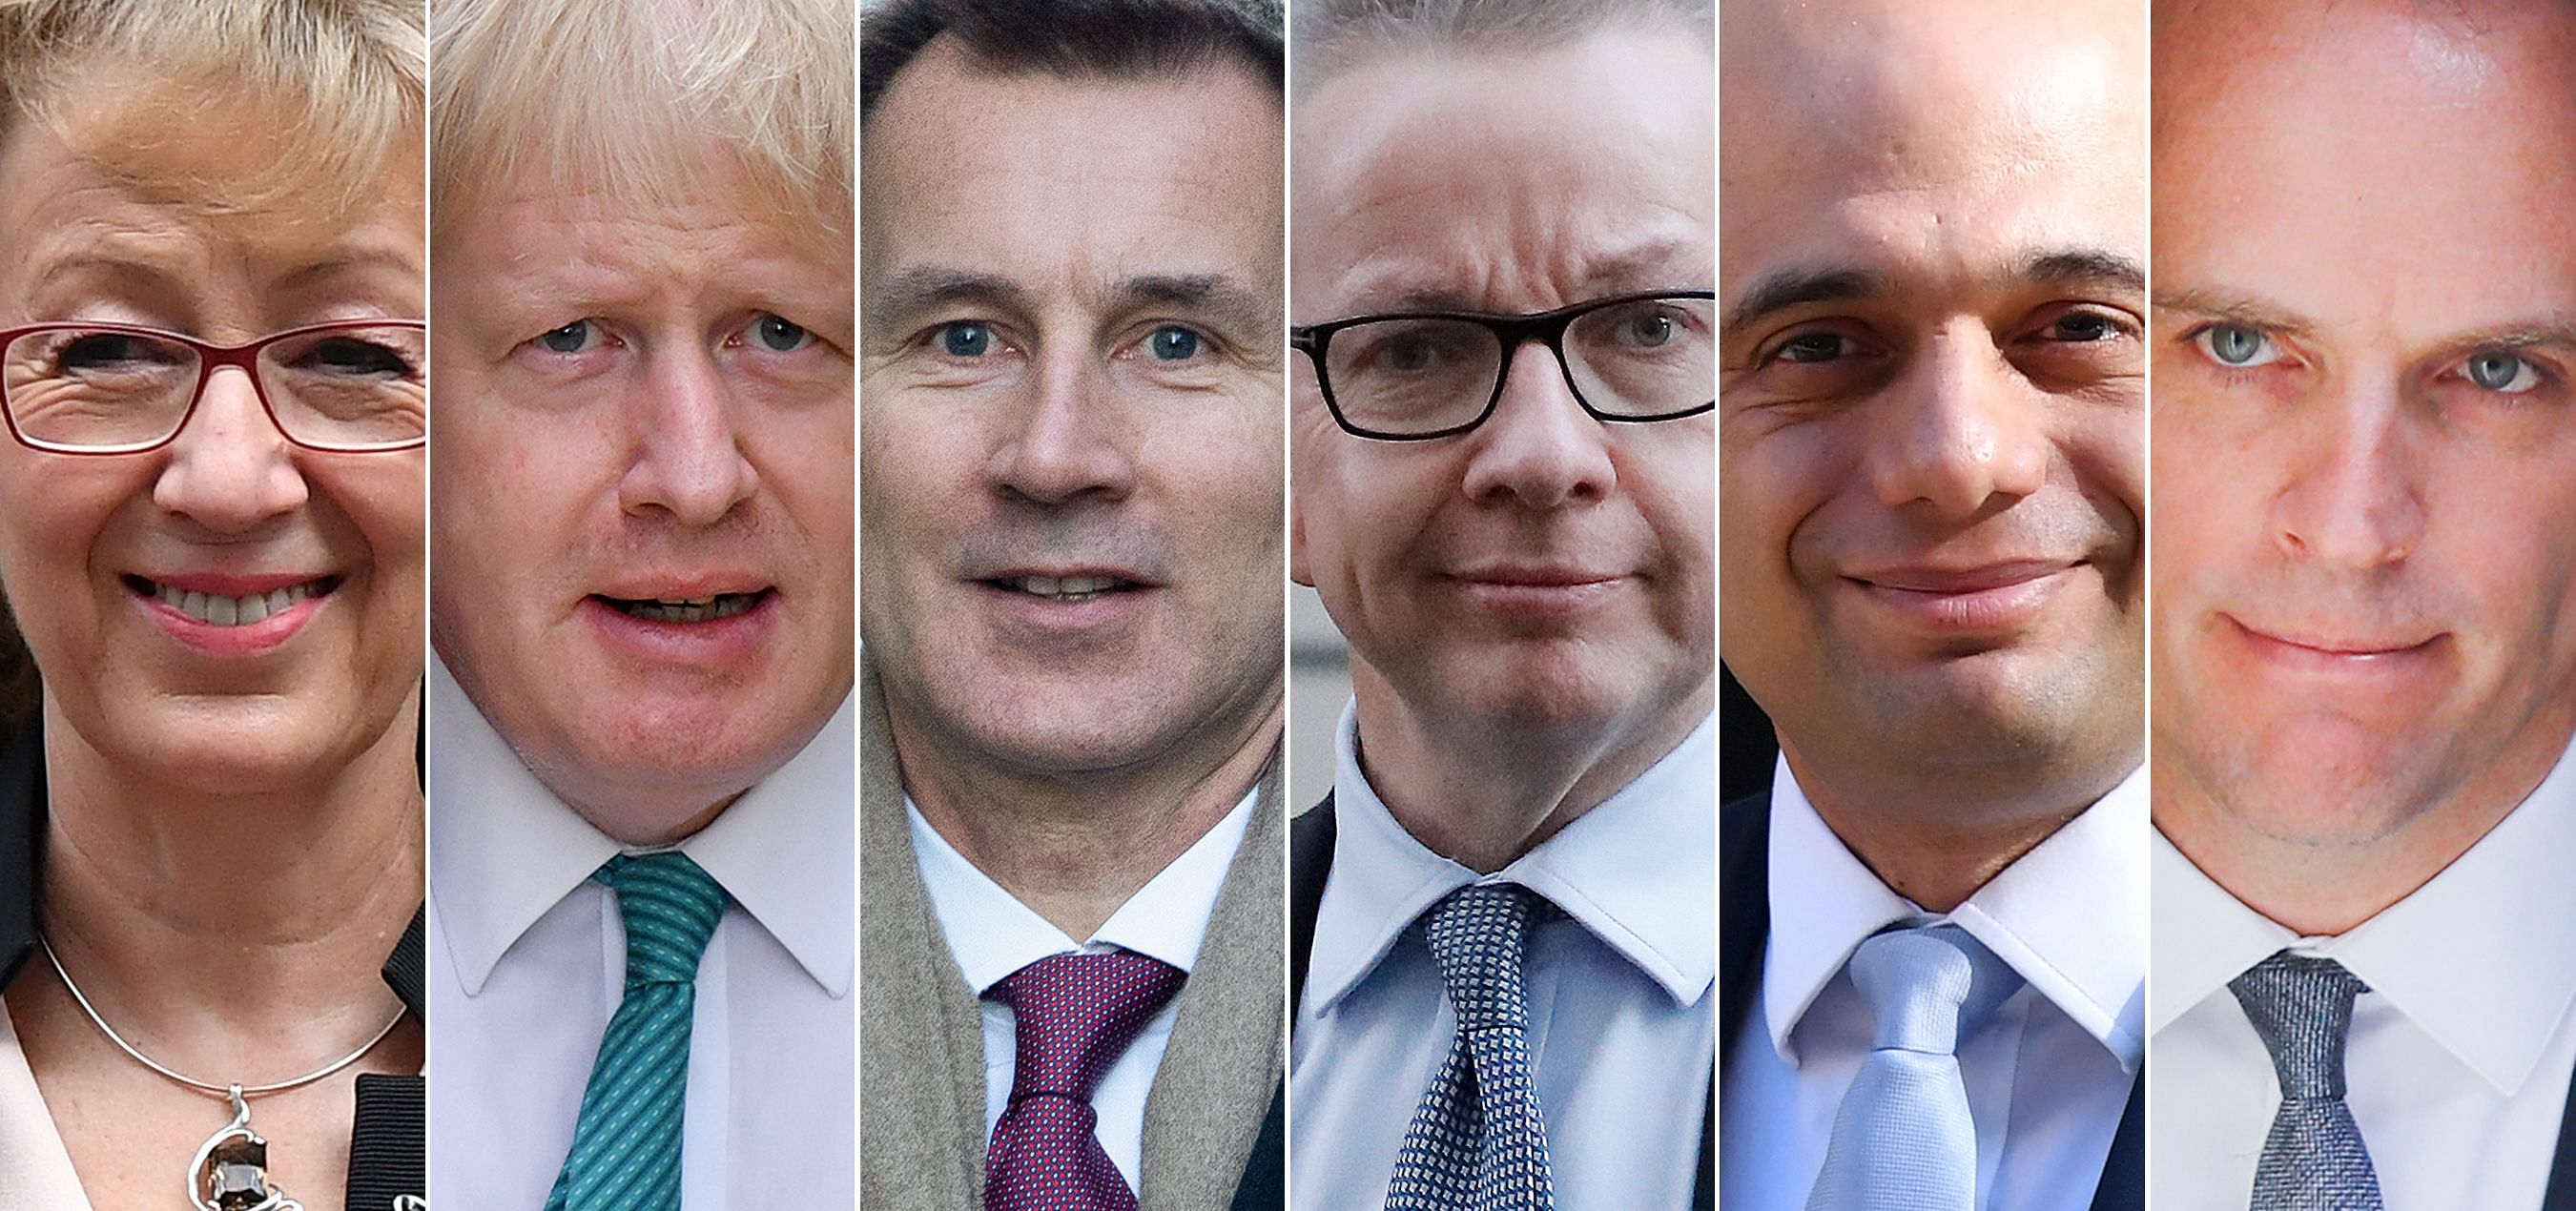 Six main contenders to replace Britain's Prime Minister Theresa May when she resigns on June 7: (L-R) former leader of the House of Commons Angela Leadsom; former foreign secretary Boris Johnson; Britain's Foreign Secretary Jeremy Hunt, Britain's Environment, Food and Rural Affairs Secretary Michael Gove; Britain's Home Secretary Sajid Javid and former Brexit secretary Dominic Raab. (Photo by AFP)